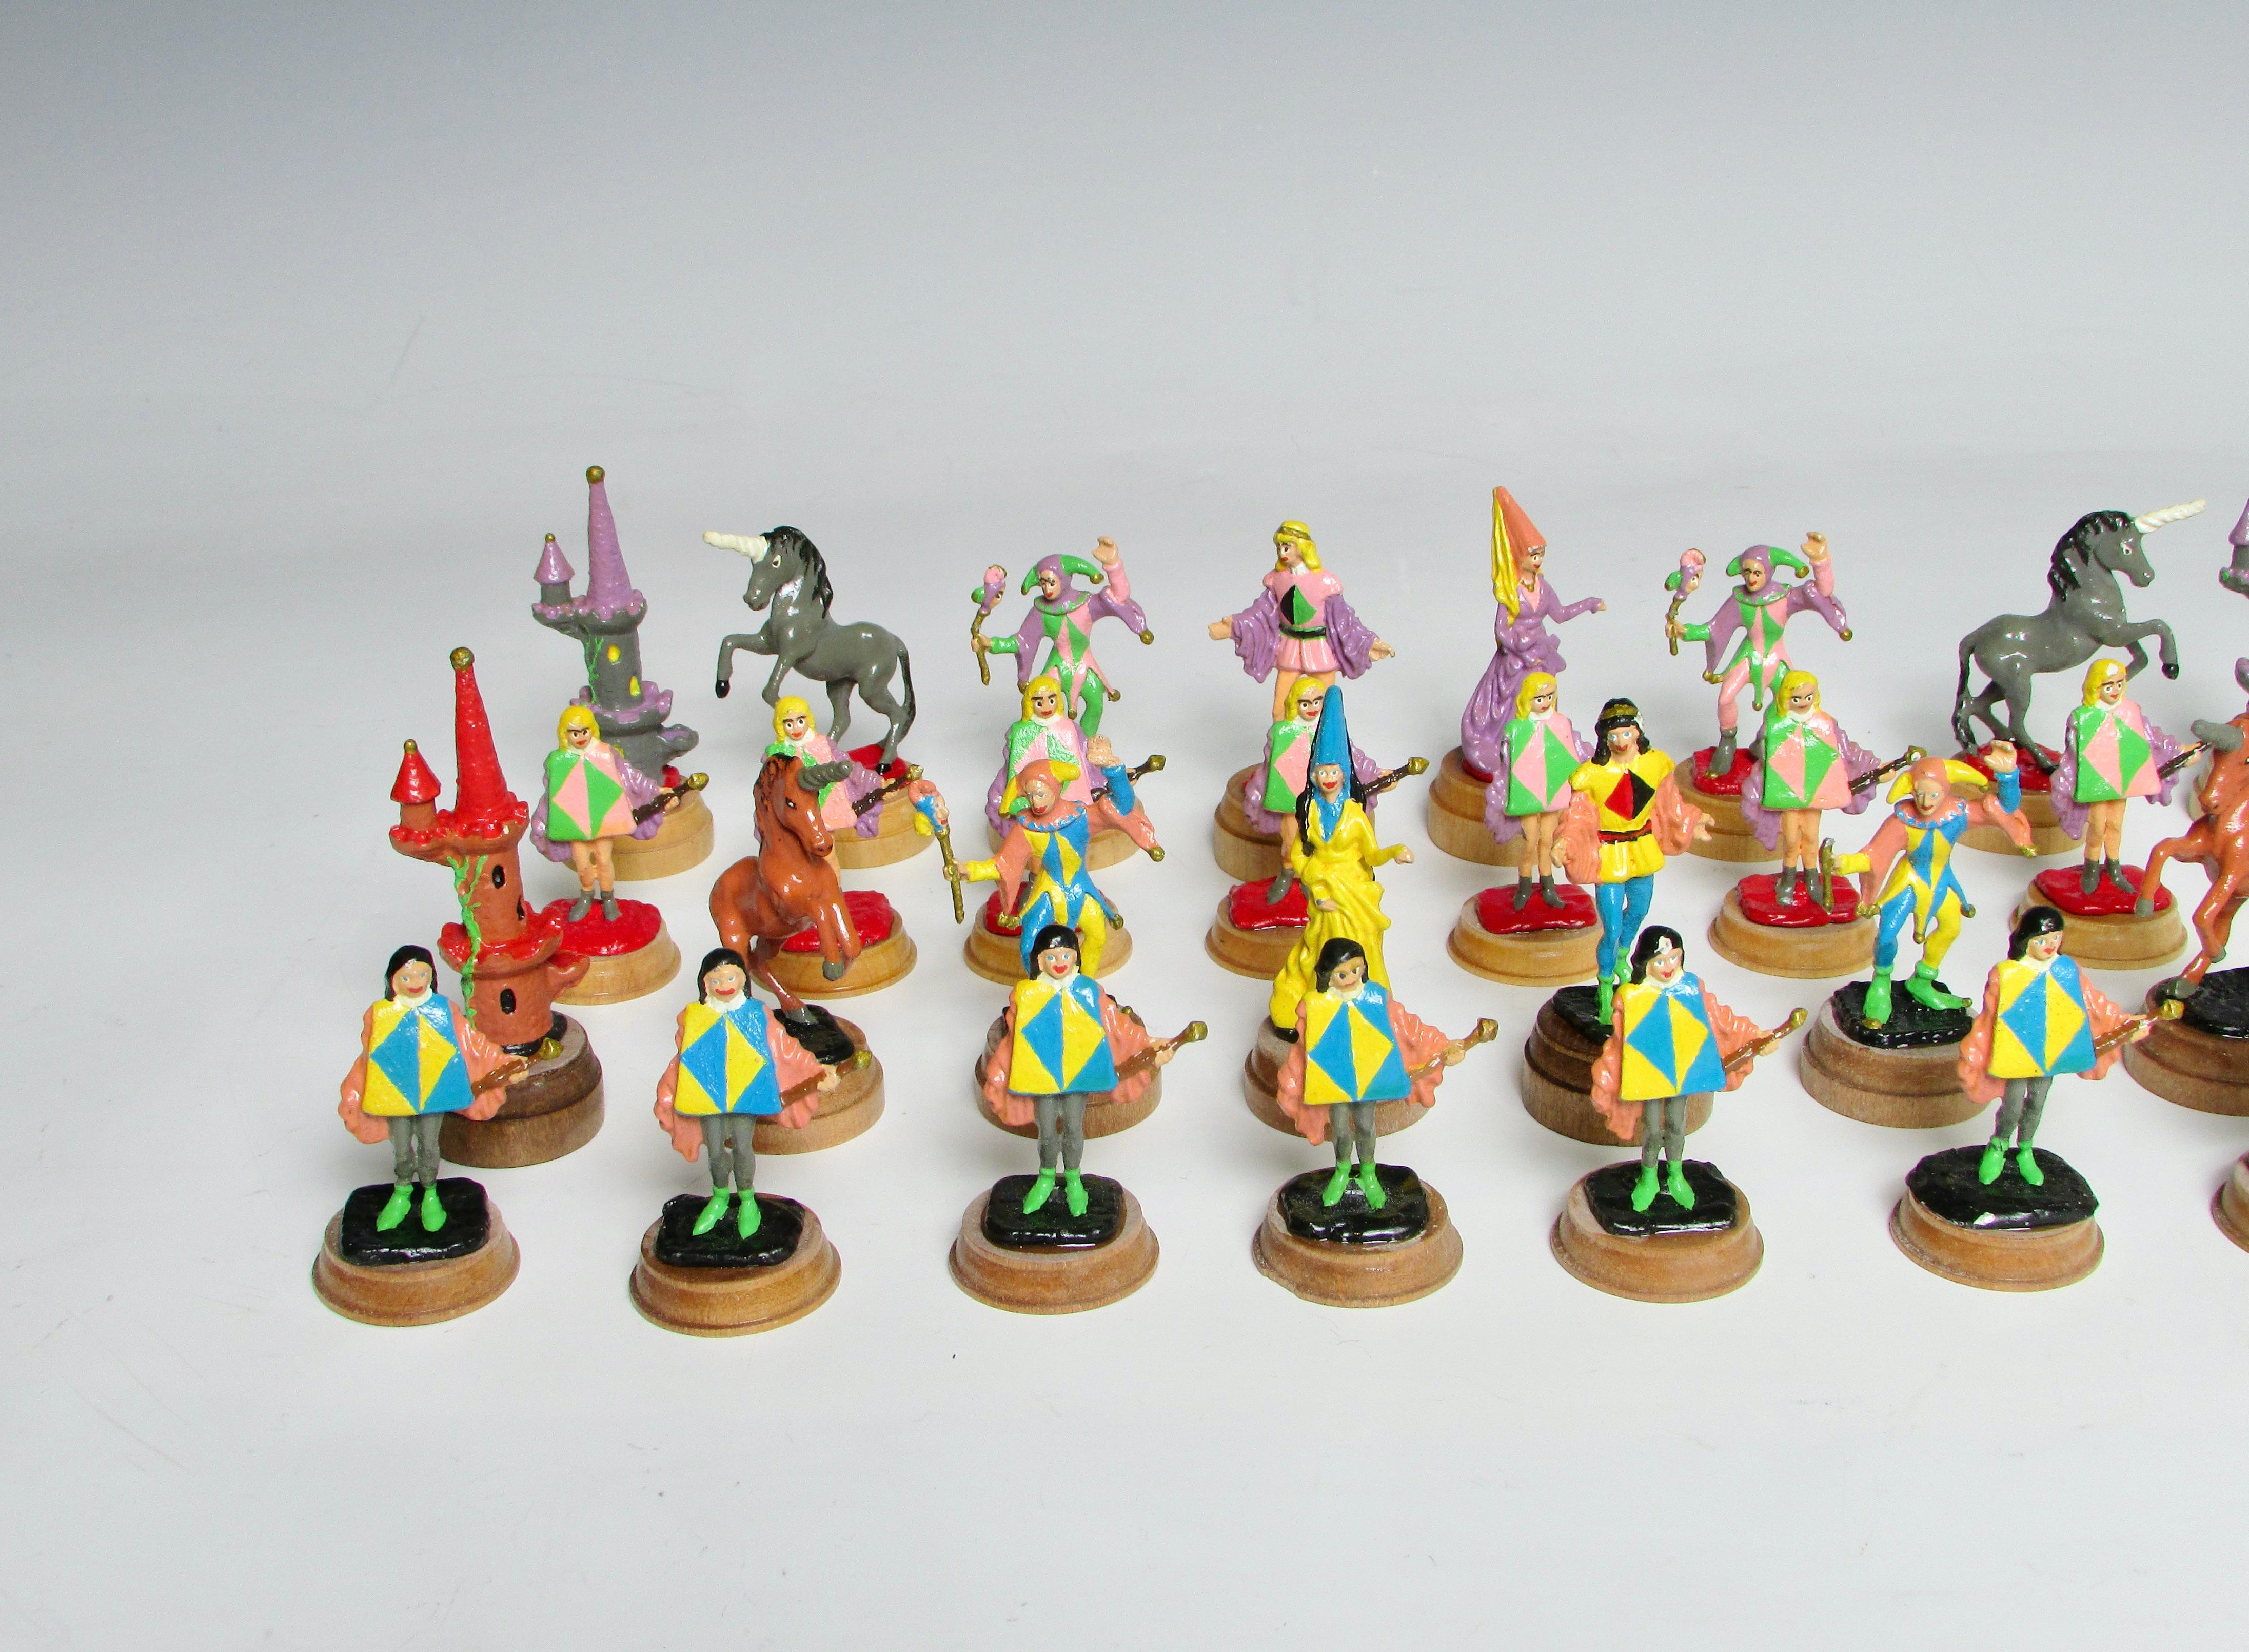 American Craftsman Hand Painted Fantasy Chess Pieces with Kings Queens Jesters Castles Unicorns For Sale